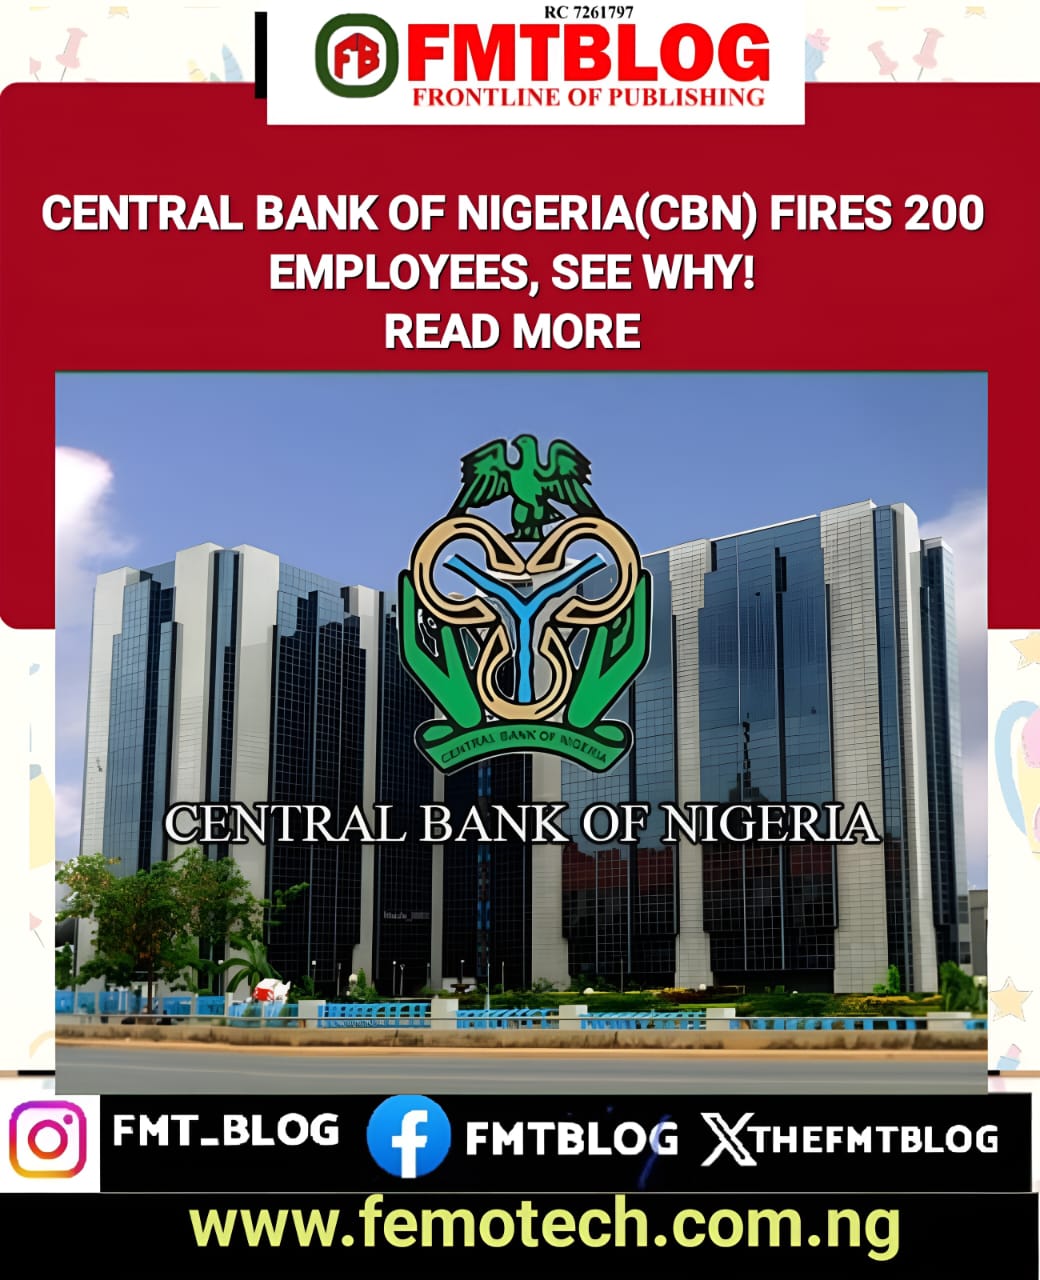 Central Bank Of Nigeria (CBN) Fires 200 Employees, See Why!